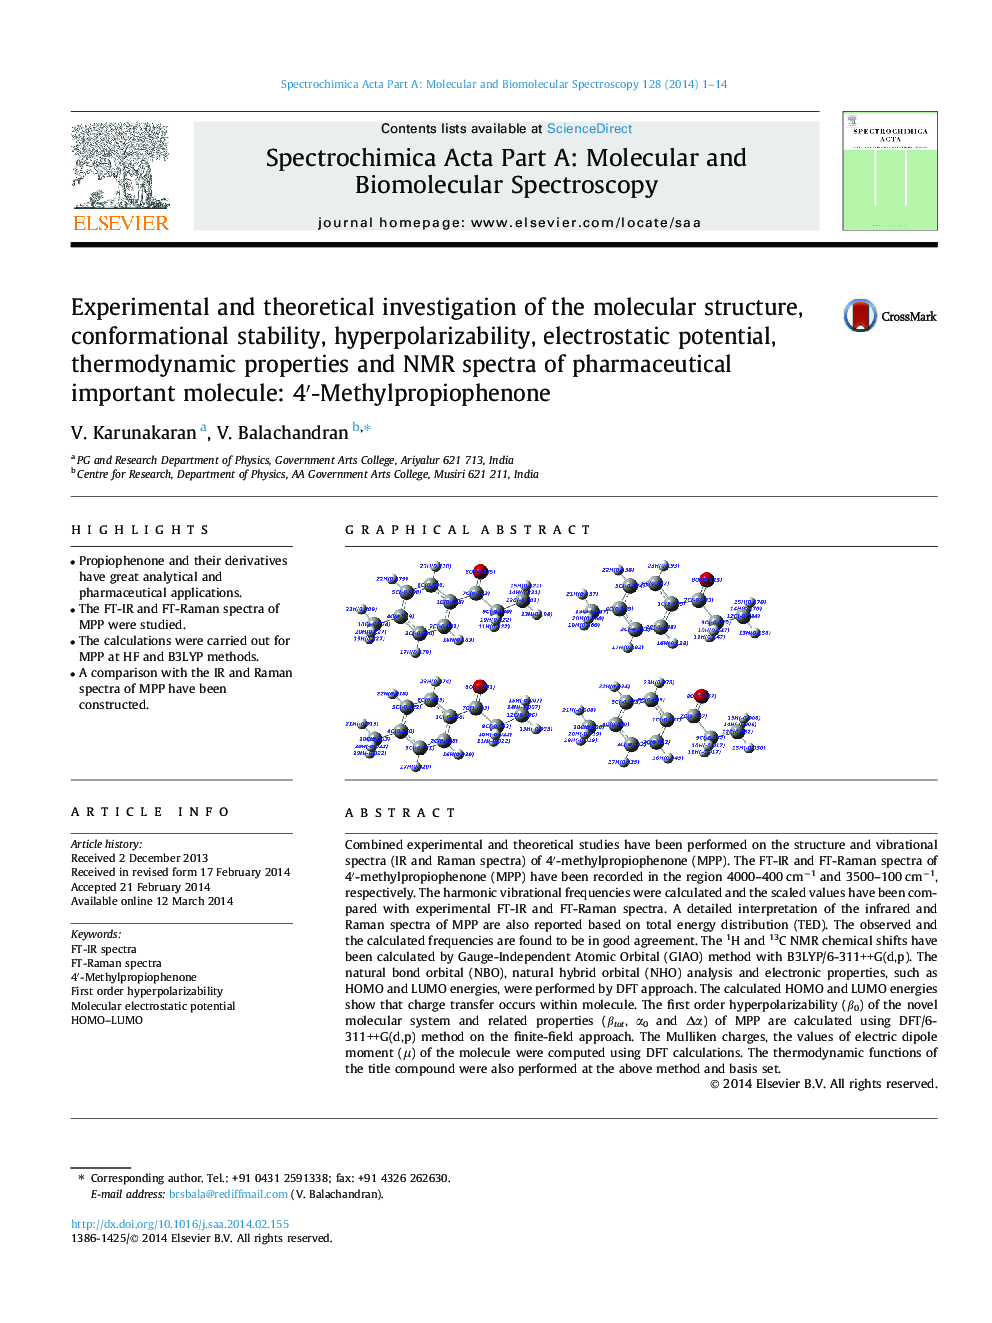 Experimental and theoretical investigation of the molecular structure, conformational stability, hyperpolarizability, electrostatic potential, thermodynamic properties and NMR spectra of pharmaceutical important molecule: 4′-Methylpropiophenone